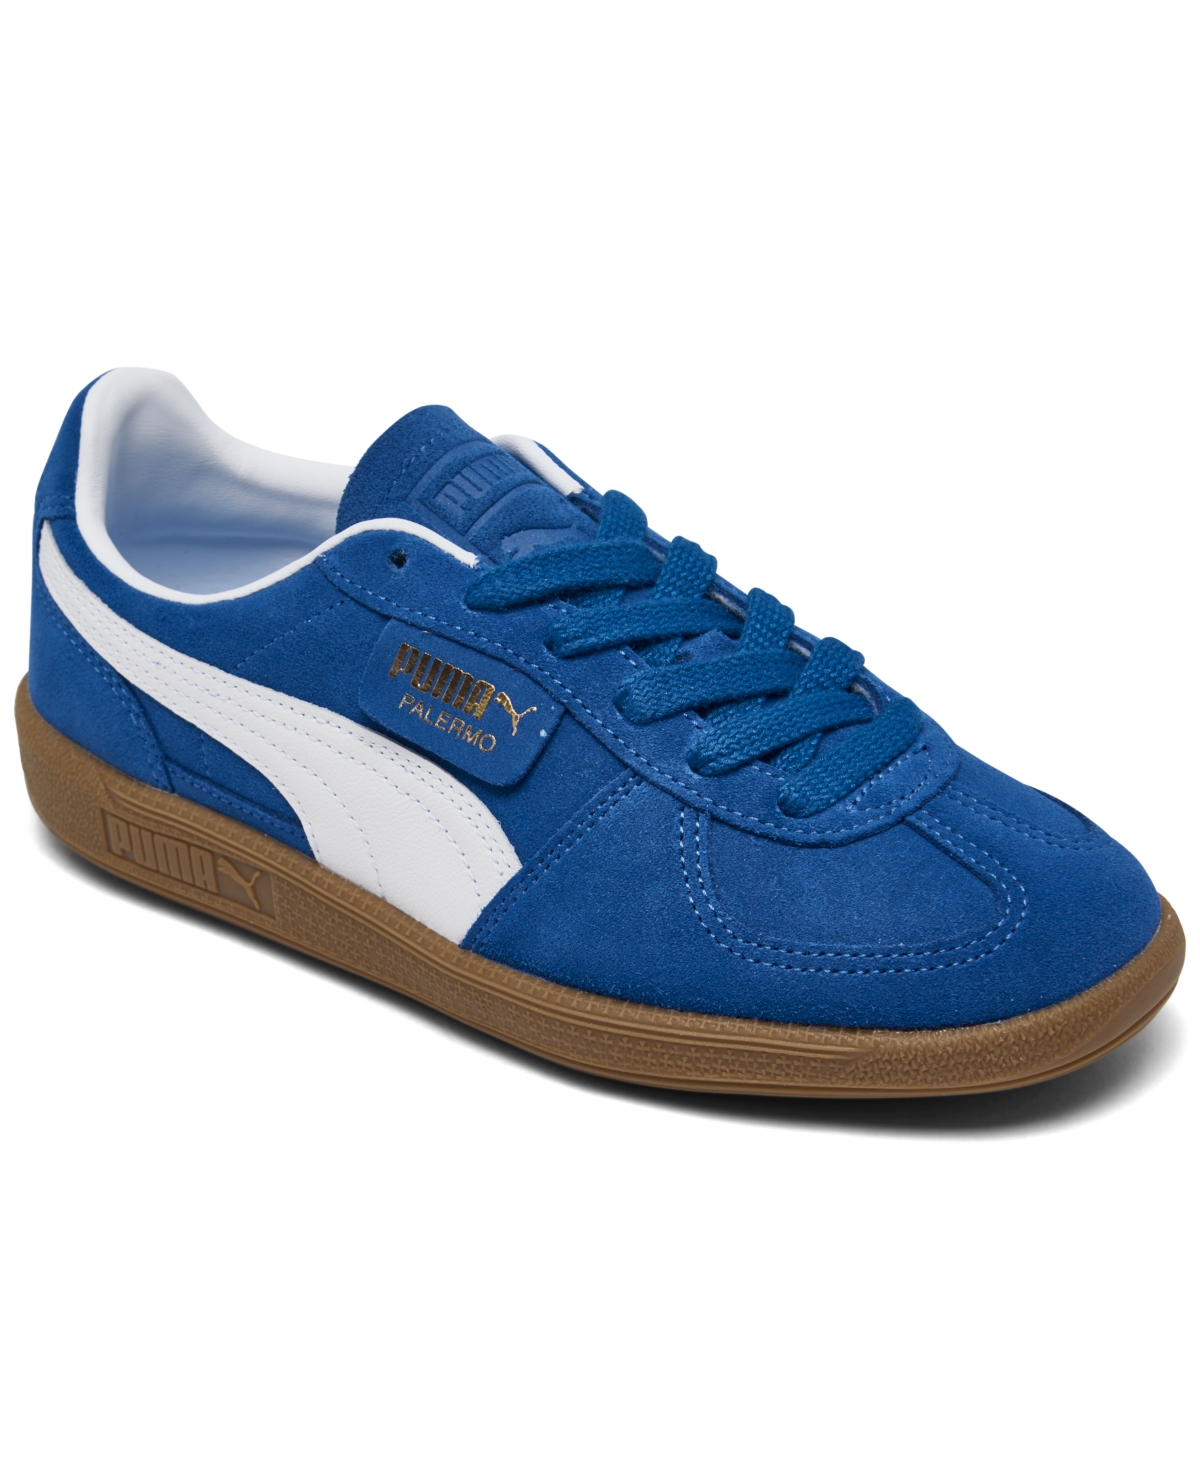 Shop Puma Women's Palermo Casual Sneakers From Finish Line In Cobalt Glaze, White